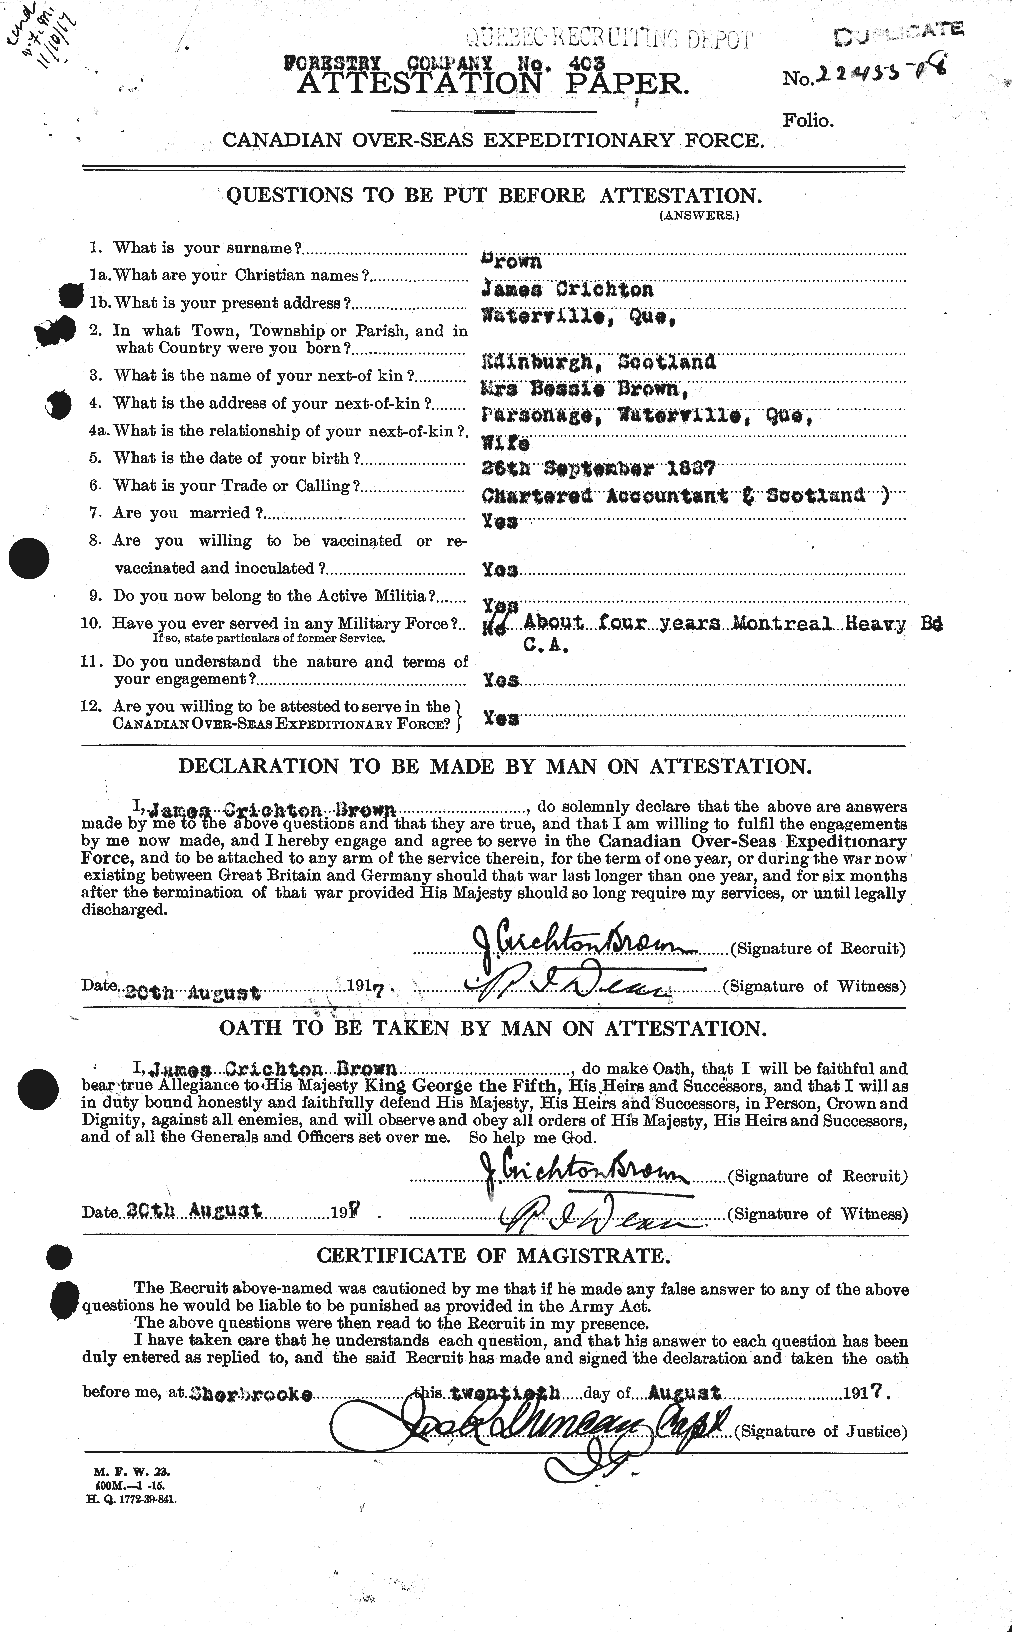 Personnel Records of the First World War - CEF 265805a